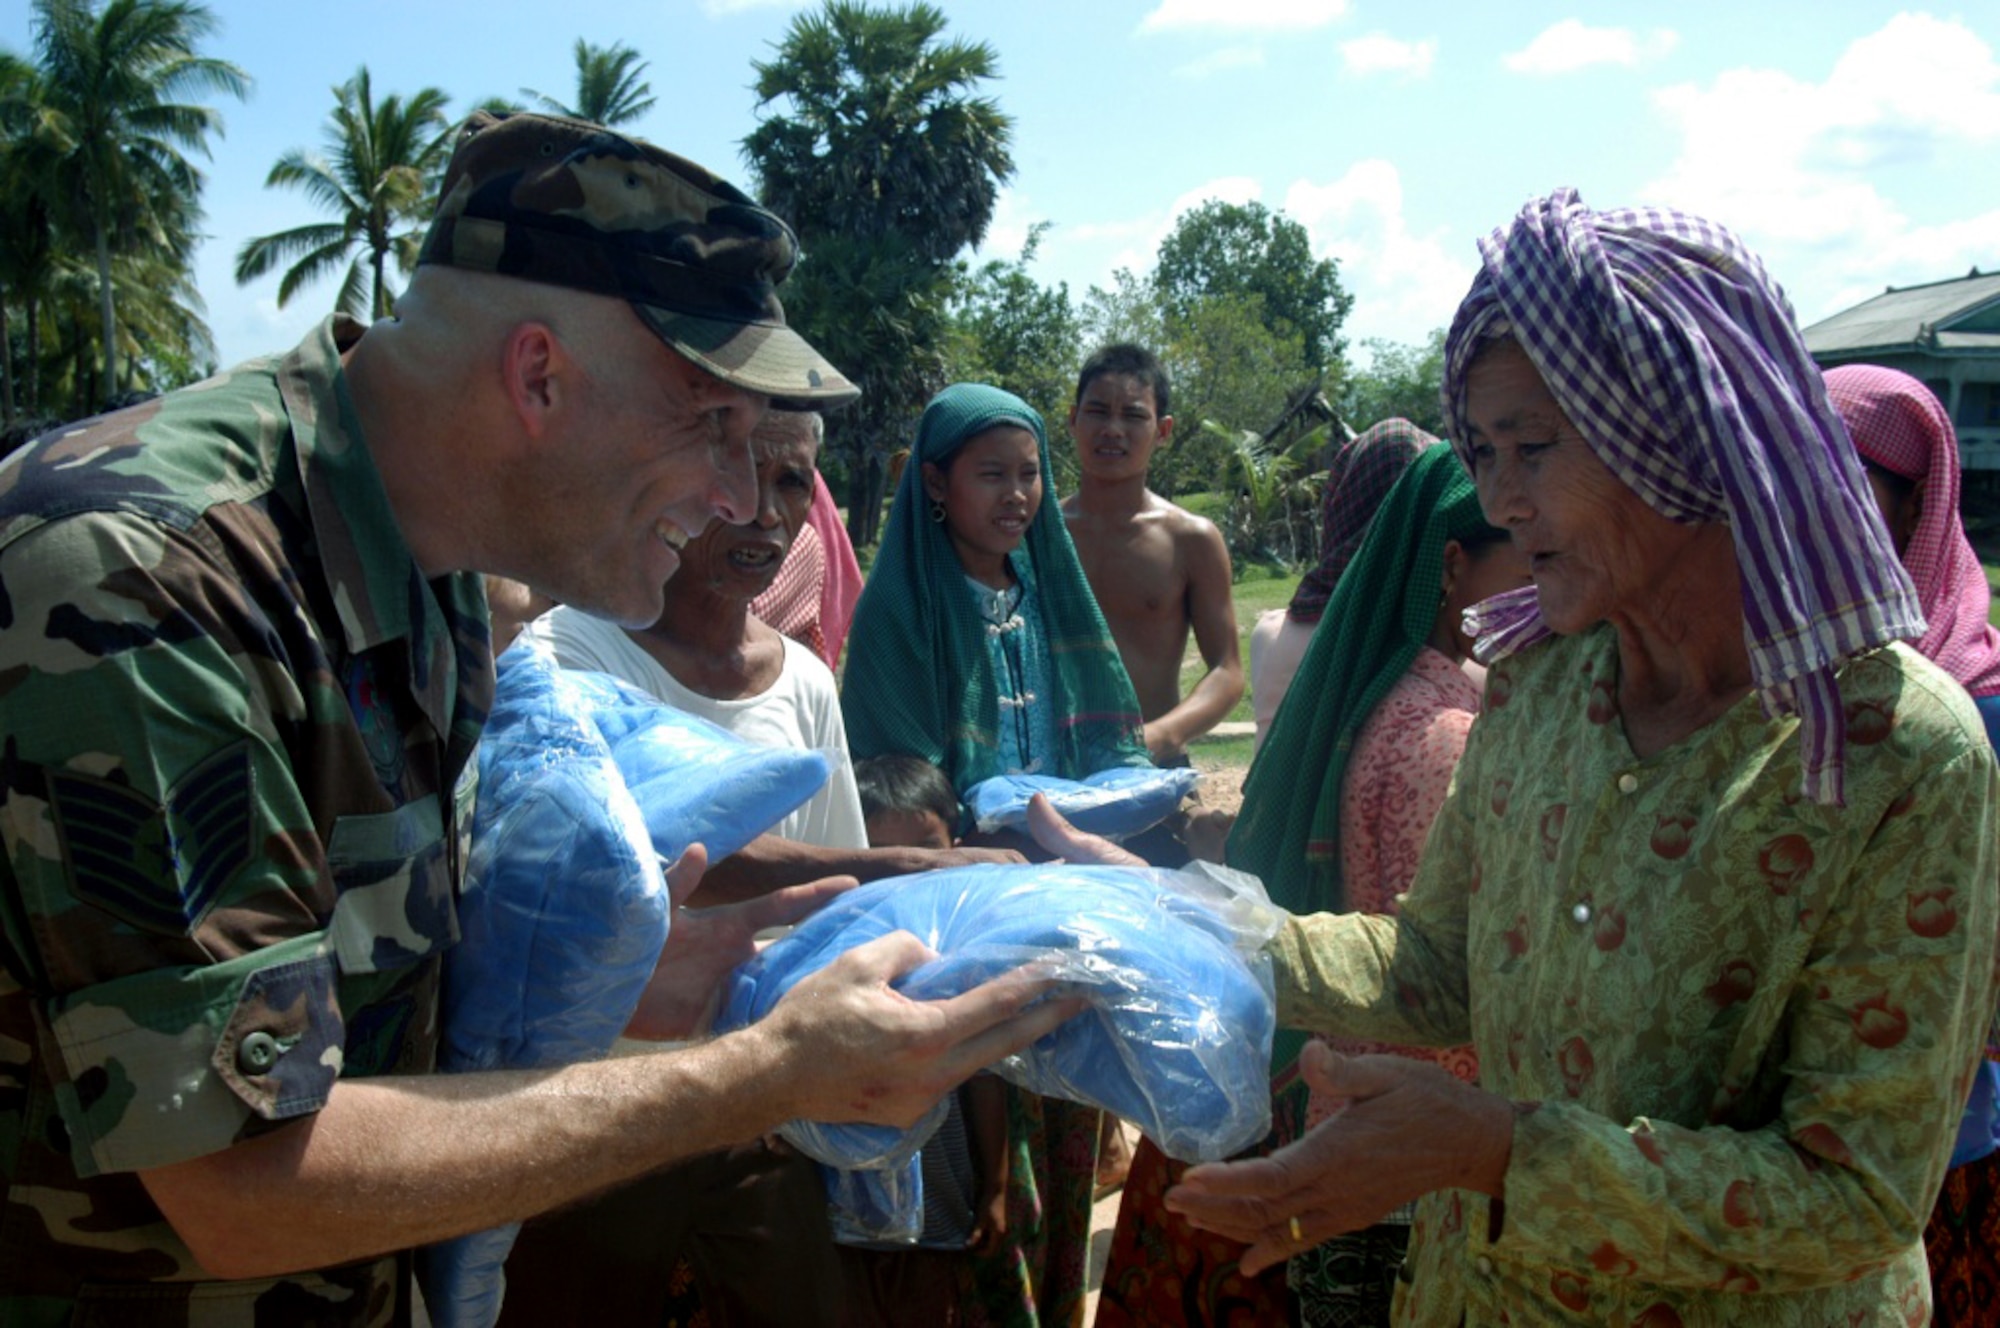 KEP, Cambodia -- Tech. Sgt. Bryan Gray hands out mosquito nets to a Cham-Muslim woman in a village near here May 20.  He is part of a 20-person blast resuscitation and victim assistance team on a two-week humanitarian mission.  Members of the team are passing out 1,000 mosquito nets to cut down on malaria.  Sergeant Gray is a biomedical equipment repair technician with the 18th Medical Support Squadron at Kadena Air Base, Japan.  (U.S. Air Force photo by Master Sgt. Adam Johnston)